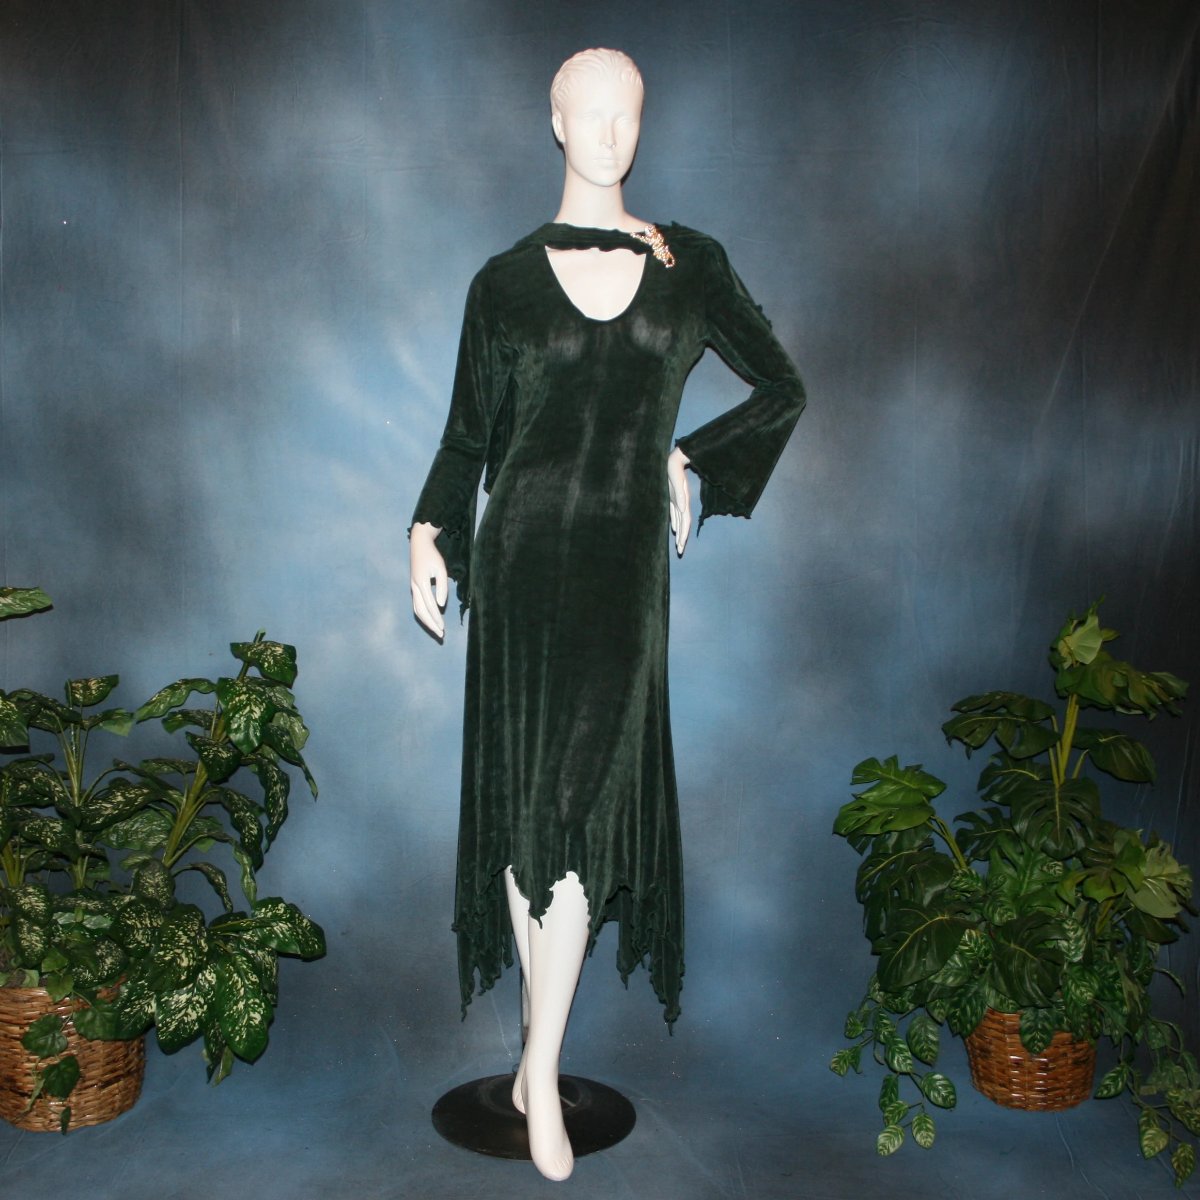 Deep green social ballroom dress created in luxurious solid slinky fabric with attached draping on shoulders & peaked skirt edge. Very full around bottom..can be a beginner ballroom dancer smooth ballroom dress. Broach is not included. This ballroom social dress can be custom created in many colors.